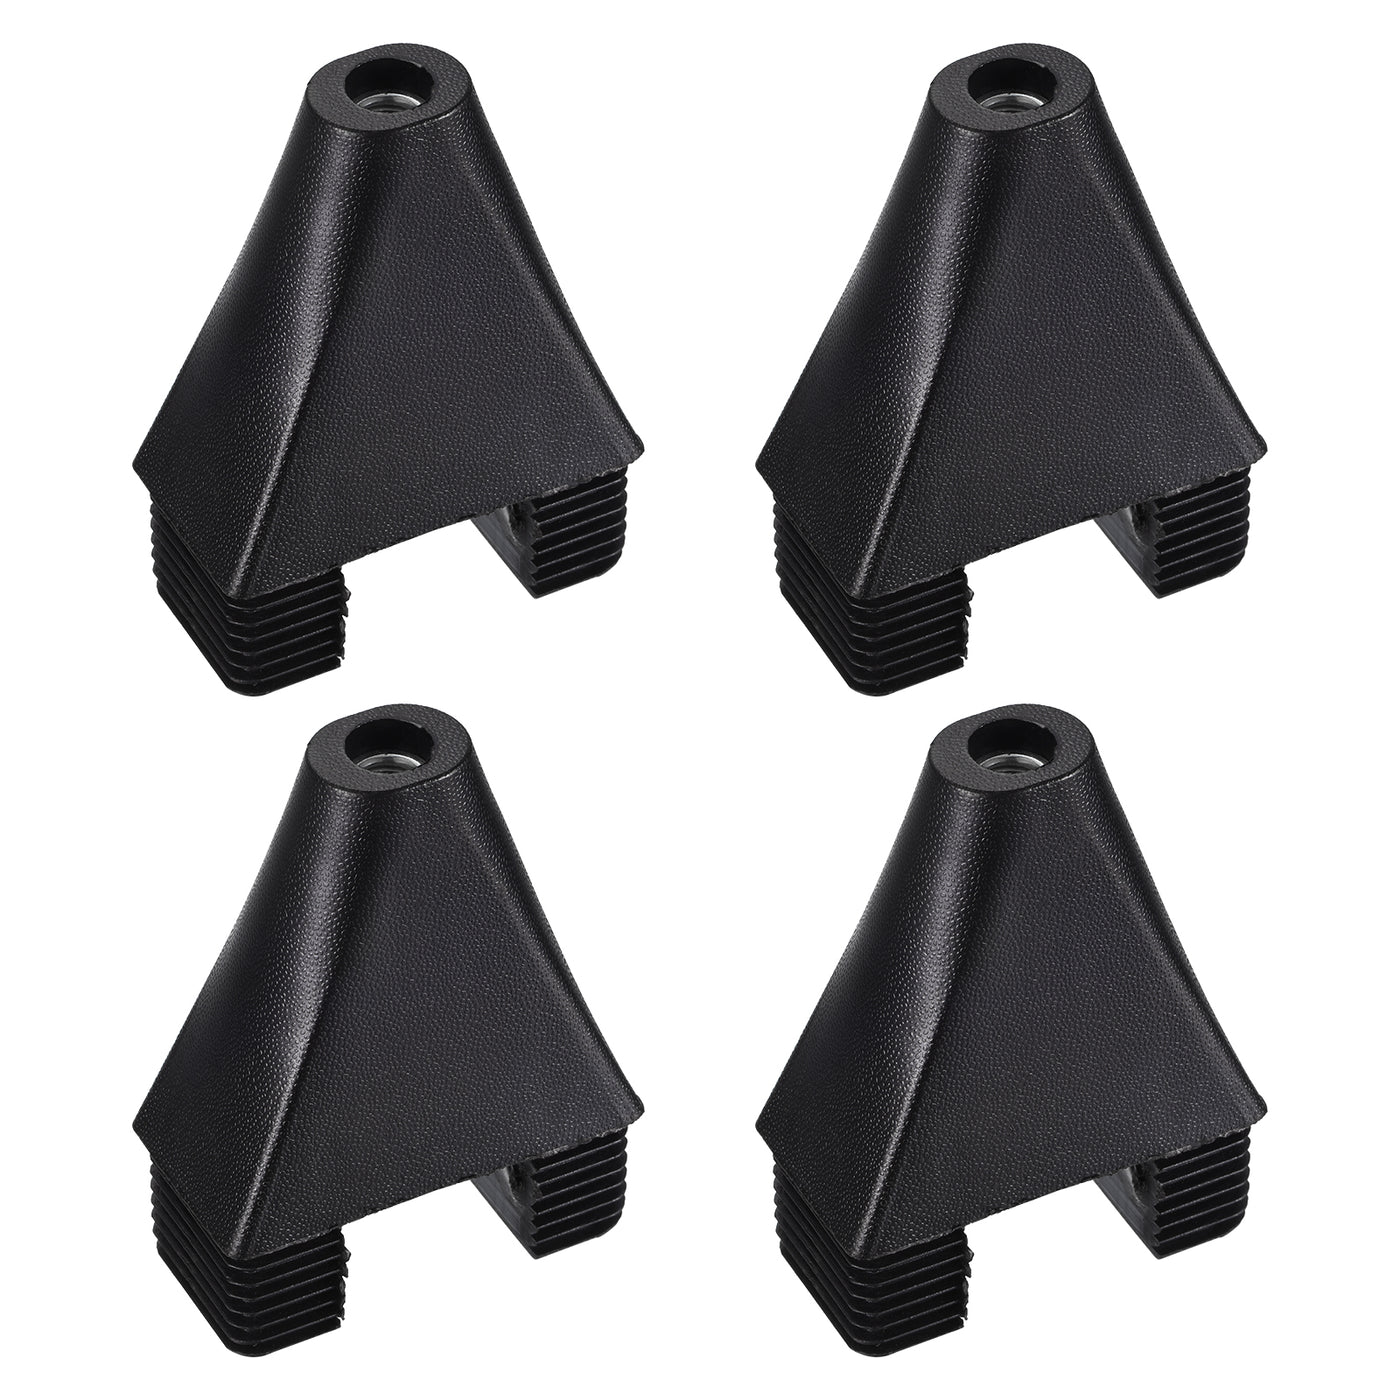 uxcell Uxcell 4Pcs 2.36"x1.18" Caster Insert with Thread, M8 Thread for Furniture